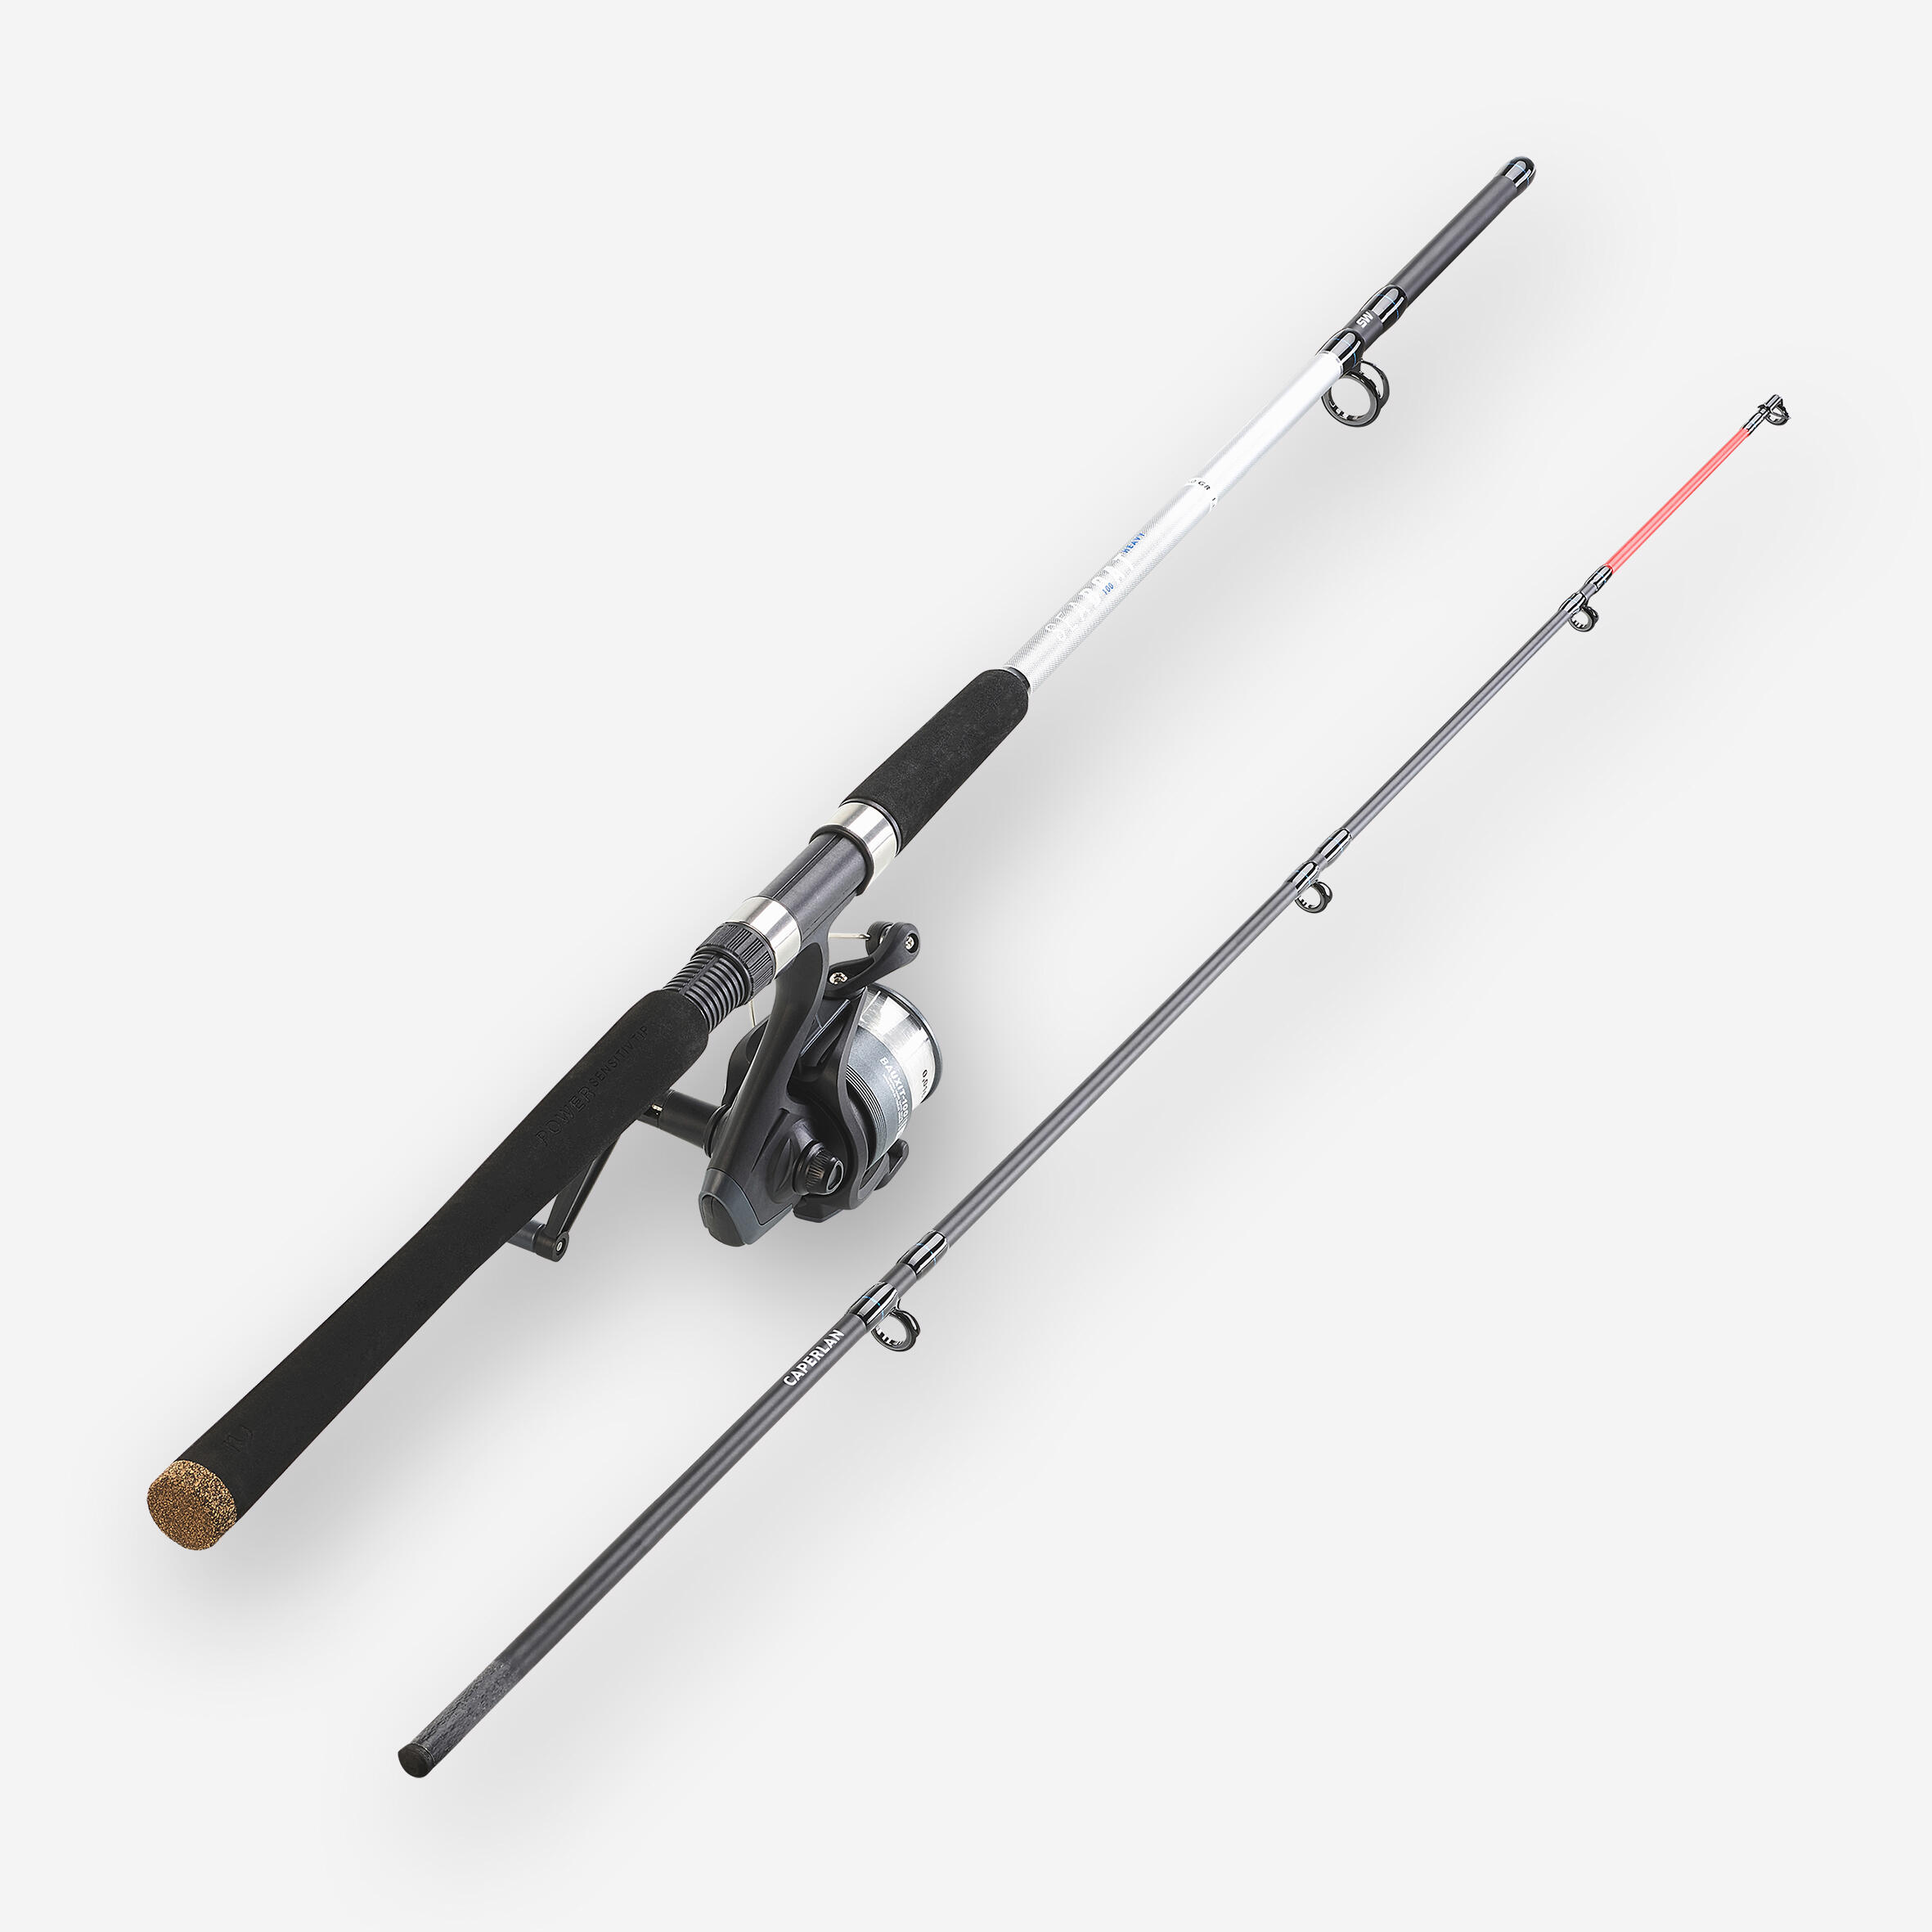 Choose your Saltwater rod